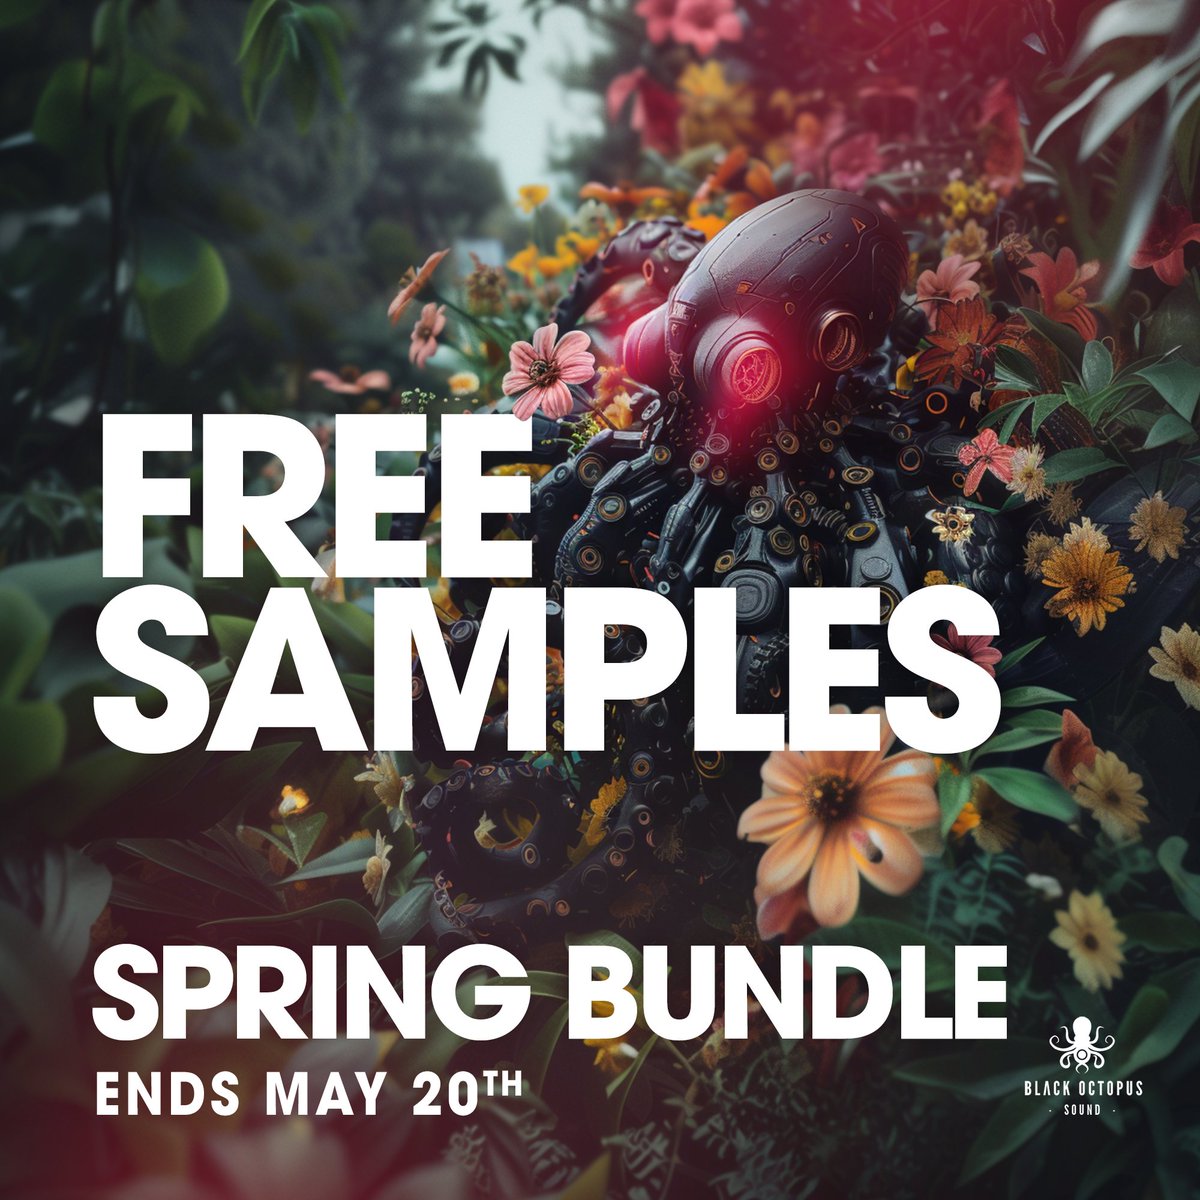 Infuse your music with 85 FREE fresh spring samples by downloading our exclusive (and free) spring sample bundle! Only available for our 50% off spring sale: blackoctopus-sound.com/product/free-s…
#musicsamples #royaltyfreemusic #musicproduction